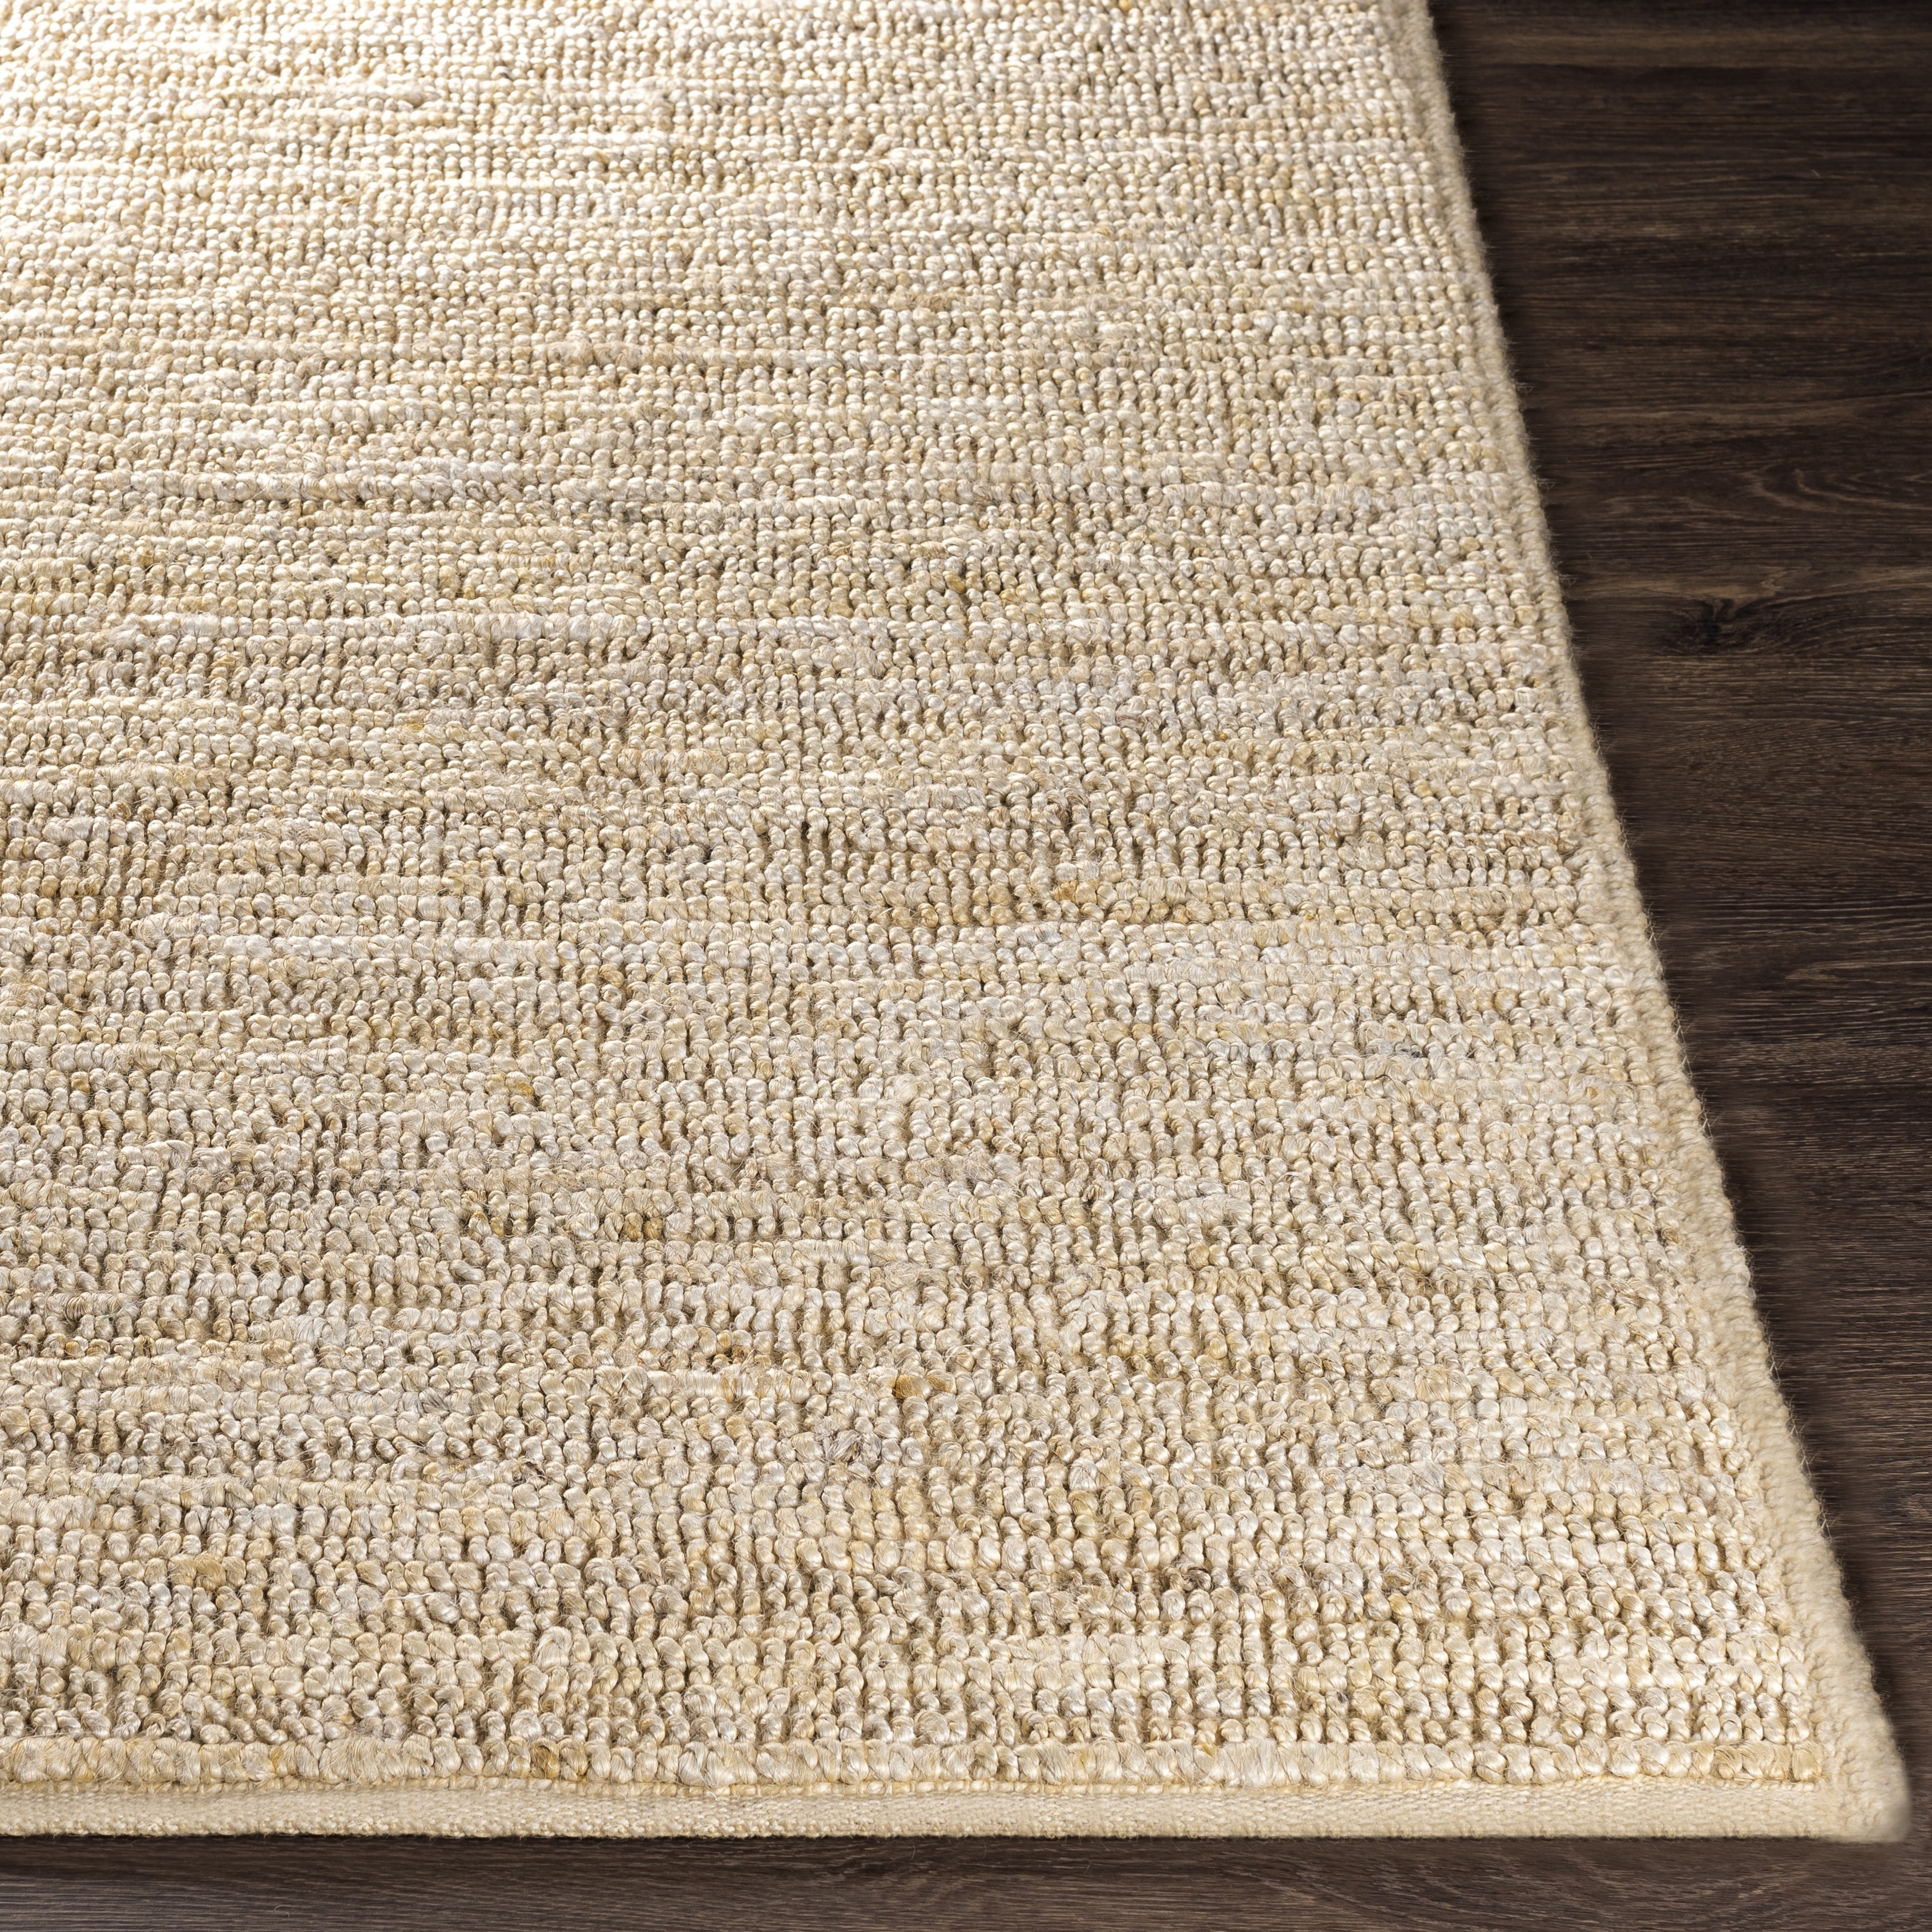 Continental Rug, 6' x 9' - Image 2